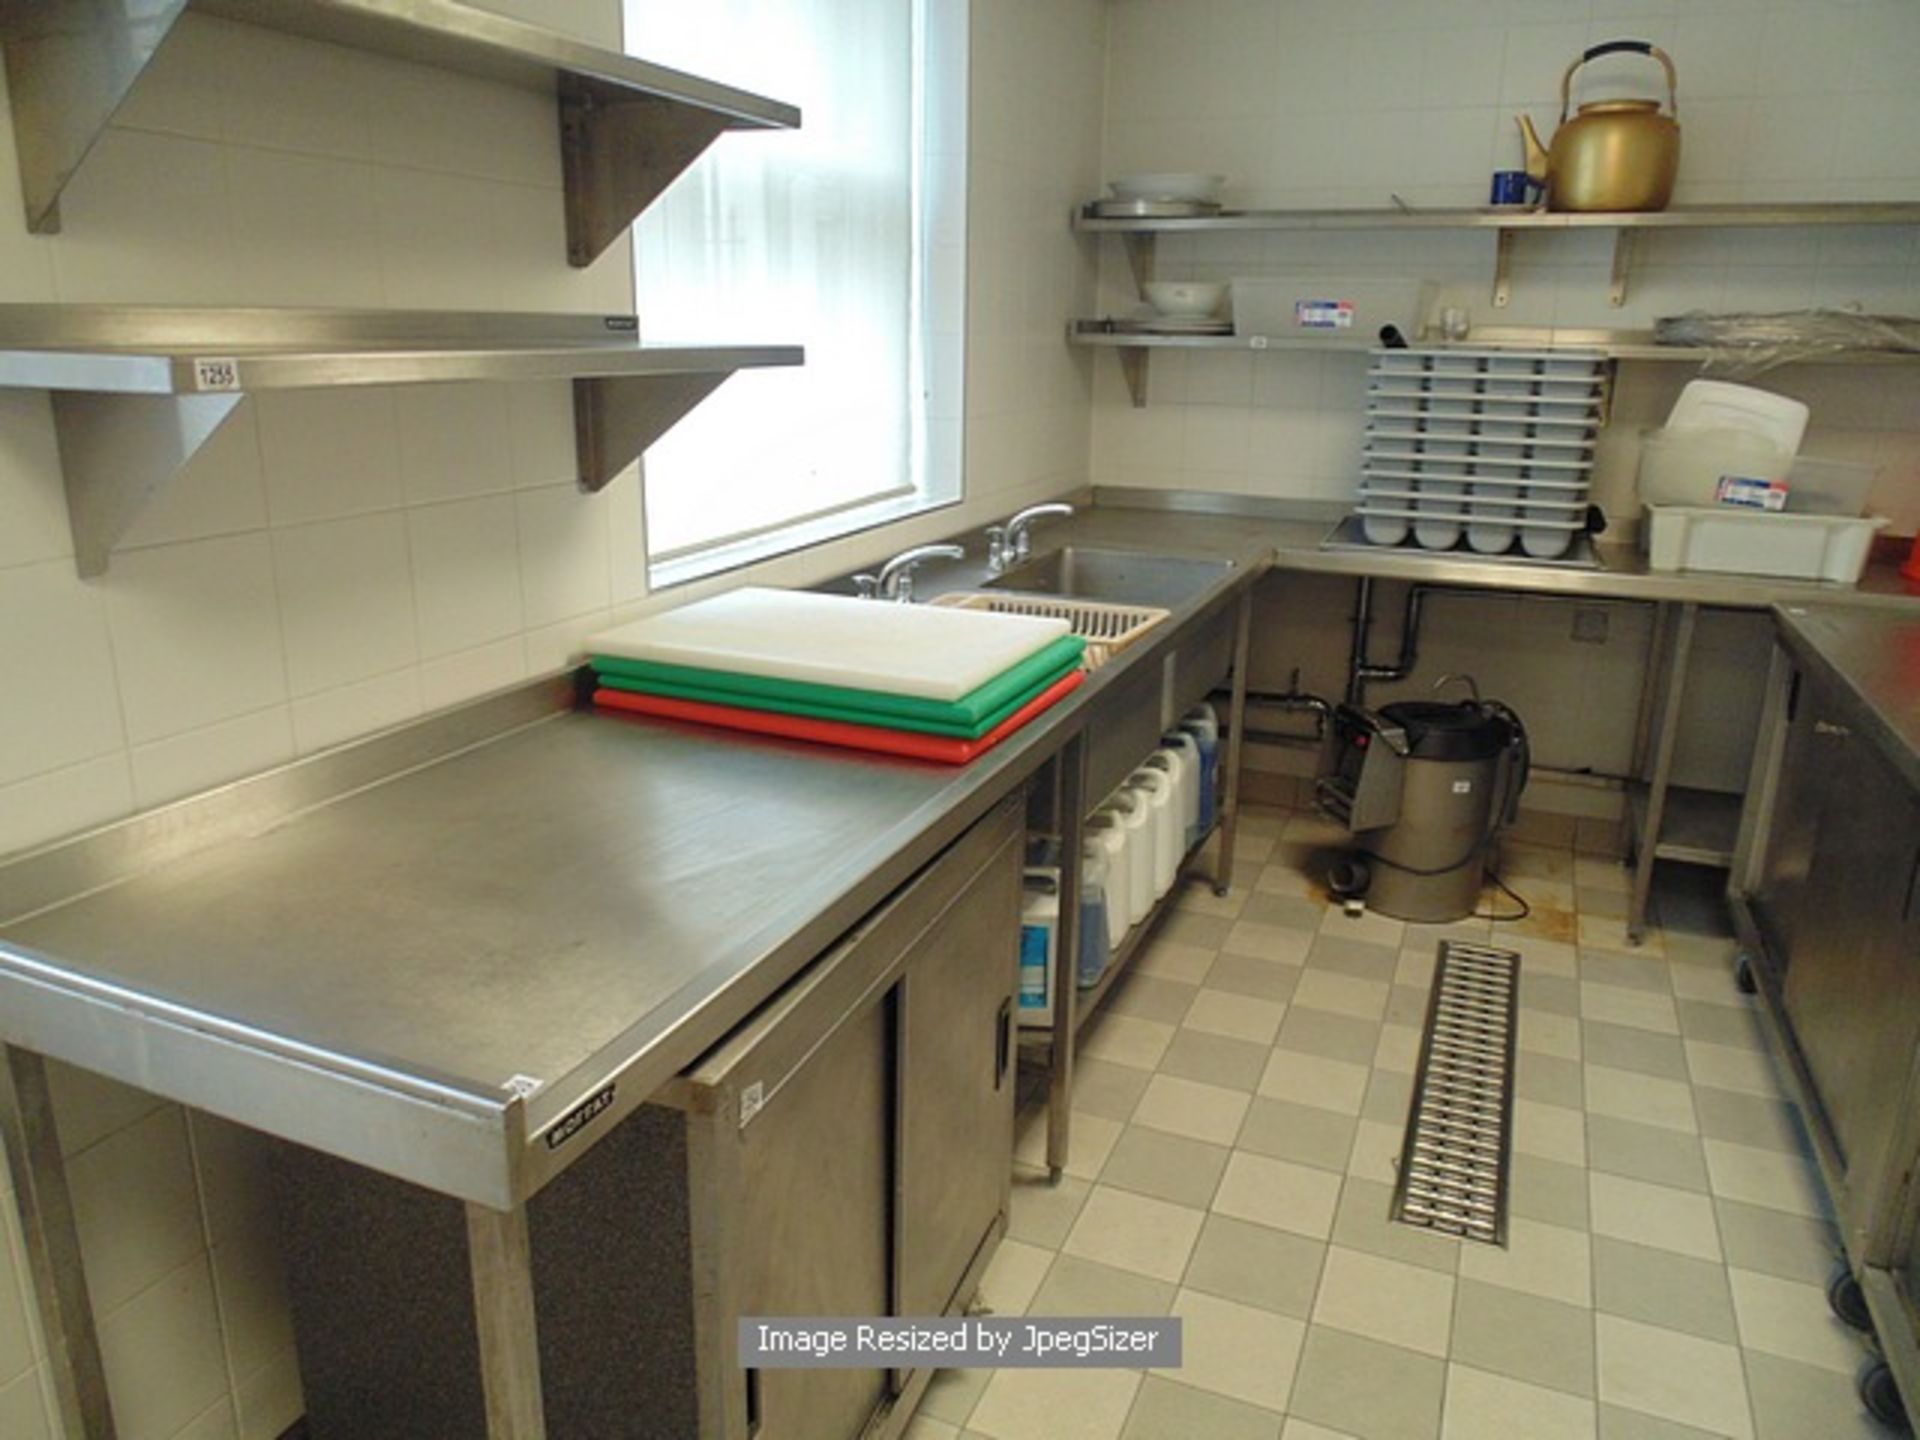 Moffat stainless steel L shaped tabling unit with double bowl utensil sink 3500 / 2520mm x 700mm